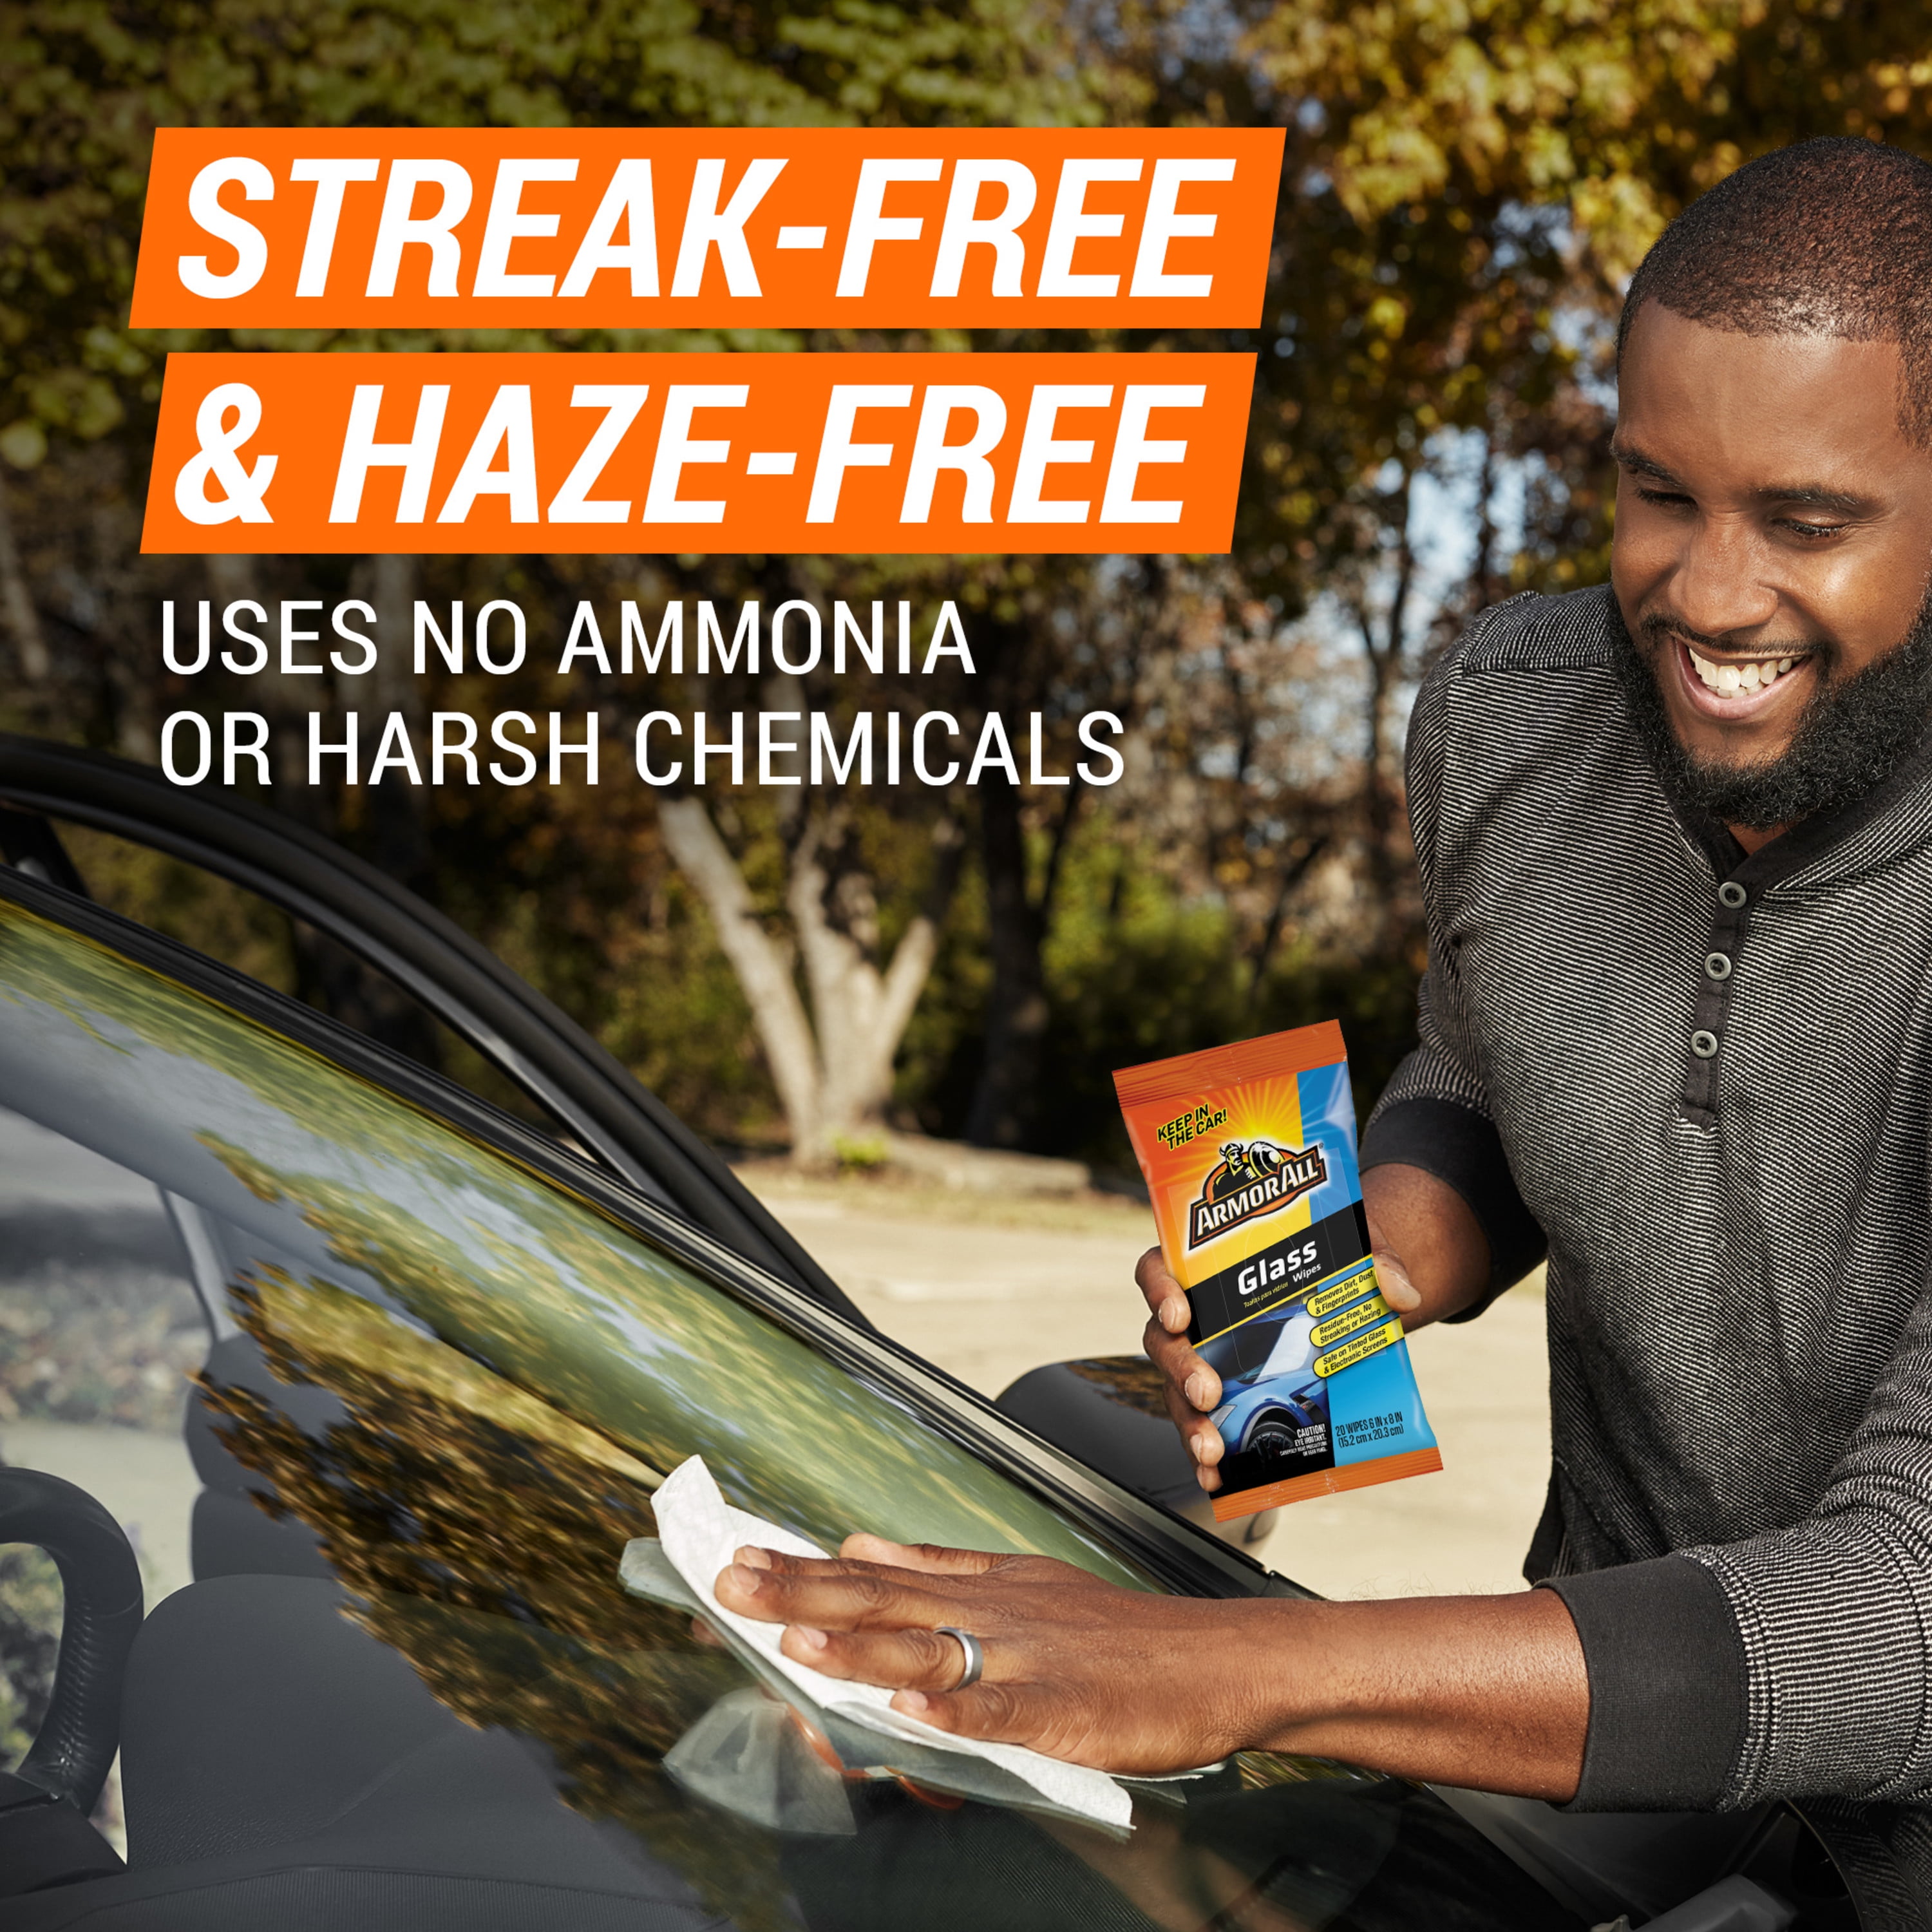 Armor All Streak Free Auto Glass Cleaning Wipes - 20 Count